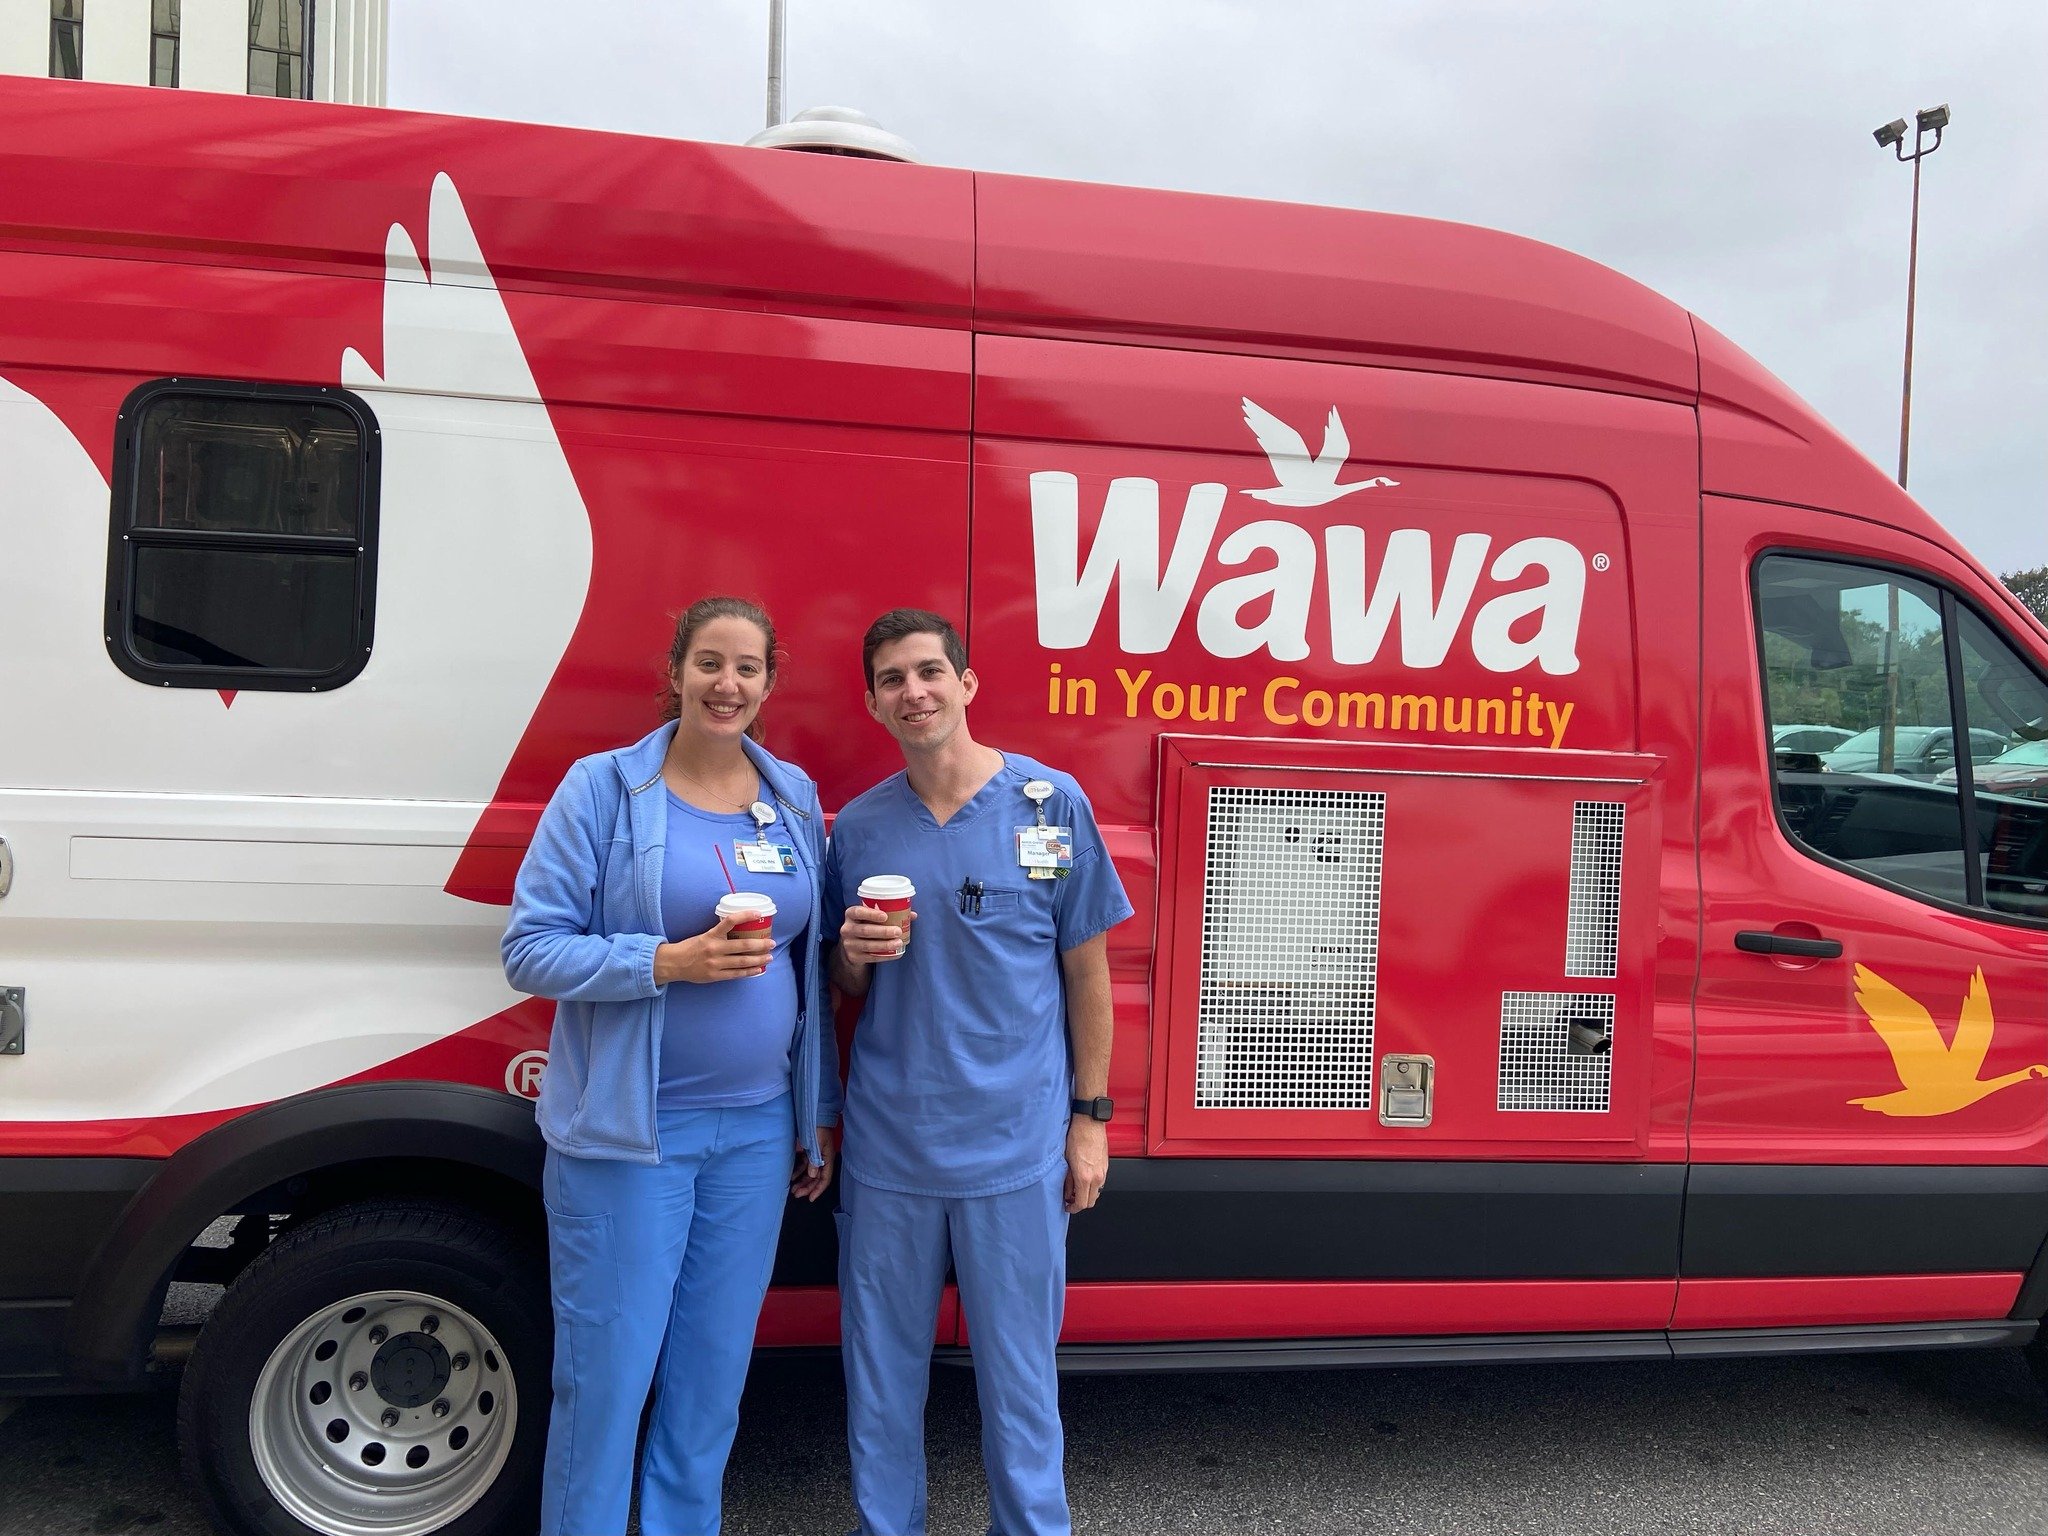 Visit your local @wawa  locations to give back to the patients at @ufhealthjax and @wolfsonchildren! Drop in your spare change in the coin box or round up at the register. All donations stay local to help children and families in our community. #Chan